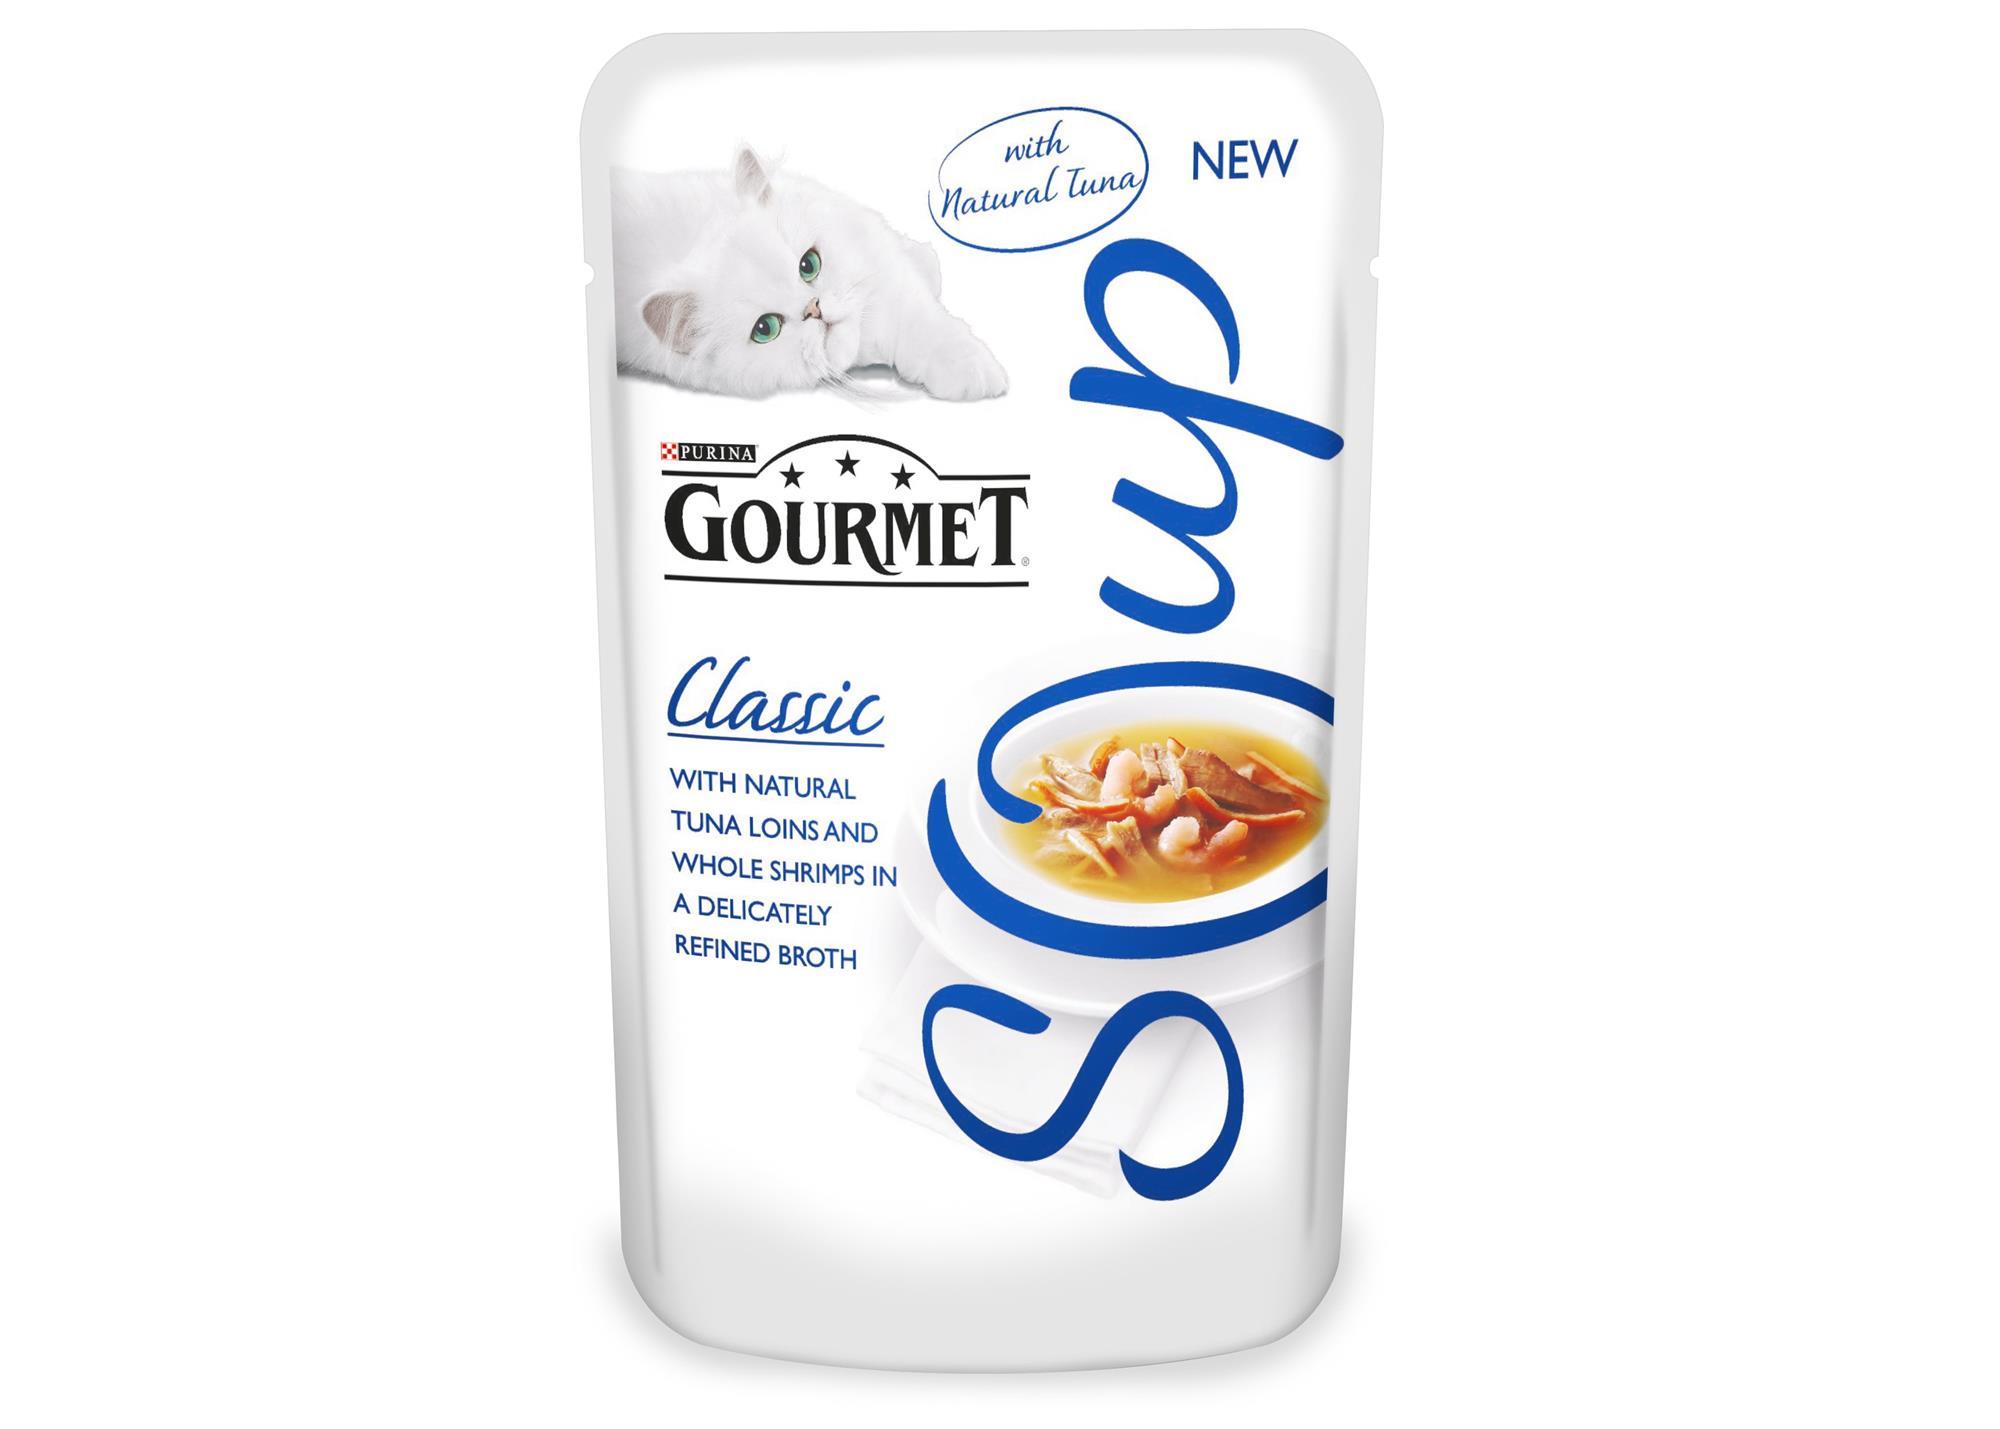 Purina Gourmet launches soup appetisers for cats Product News